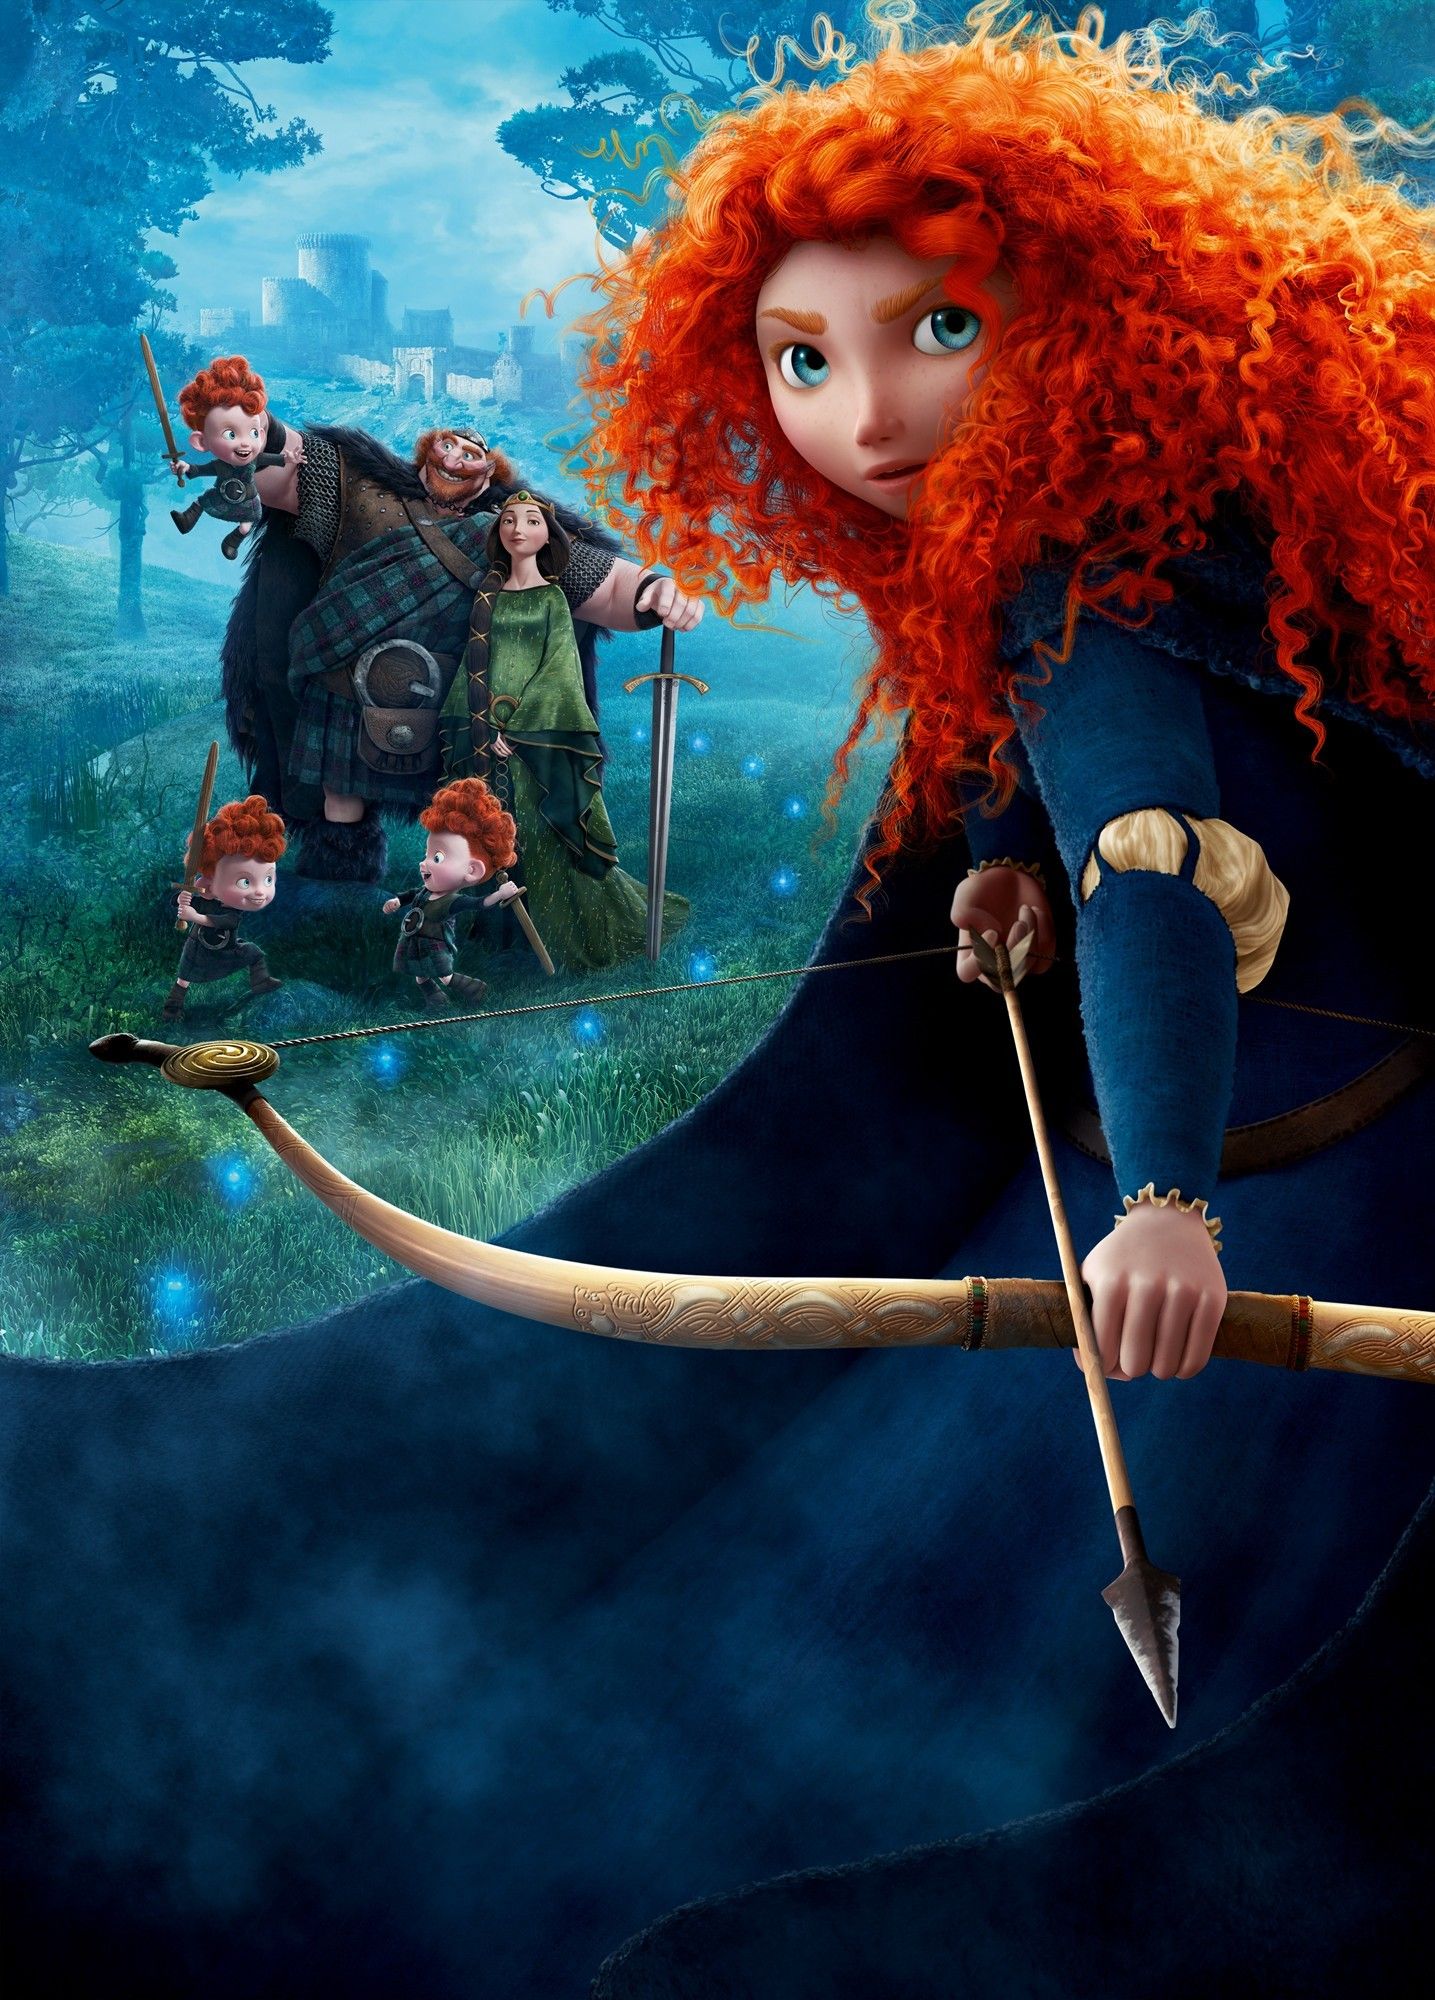 King Fergus, Queen Elinor, The Triplets and Princess Merida of Walt Disney Pictures' Brave (2012)